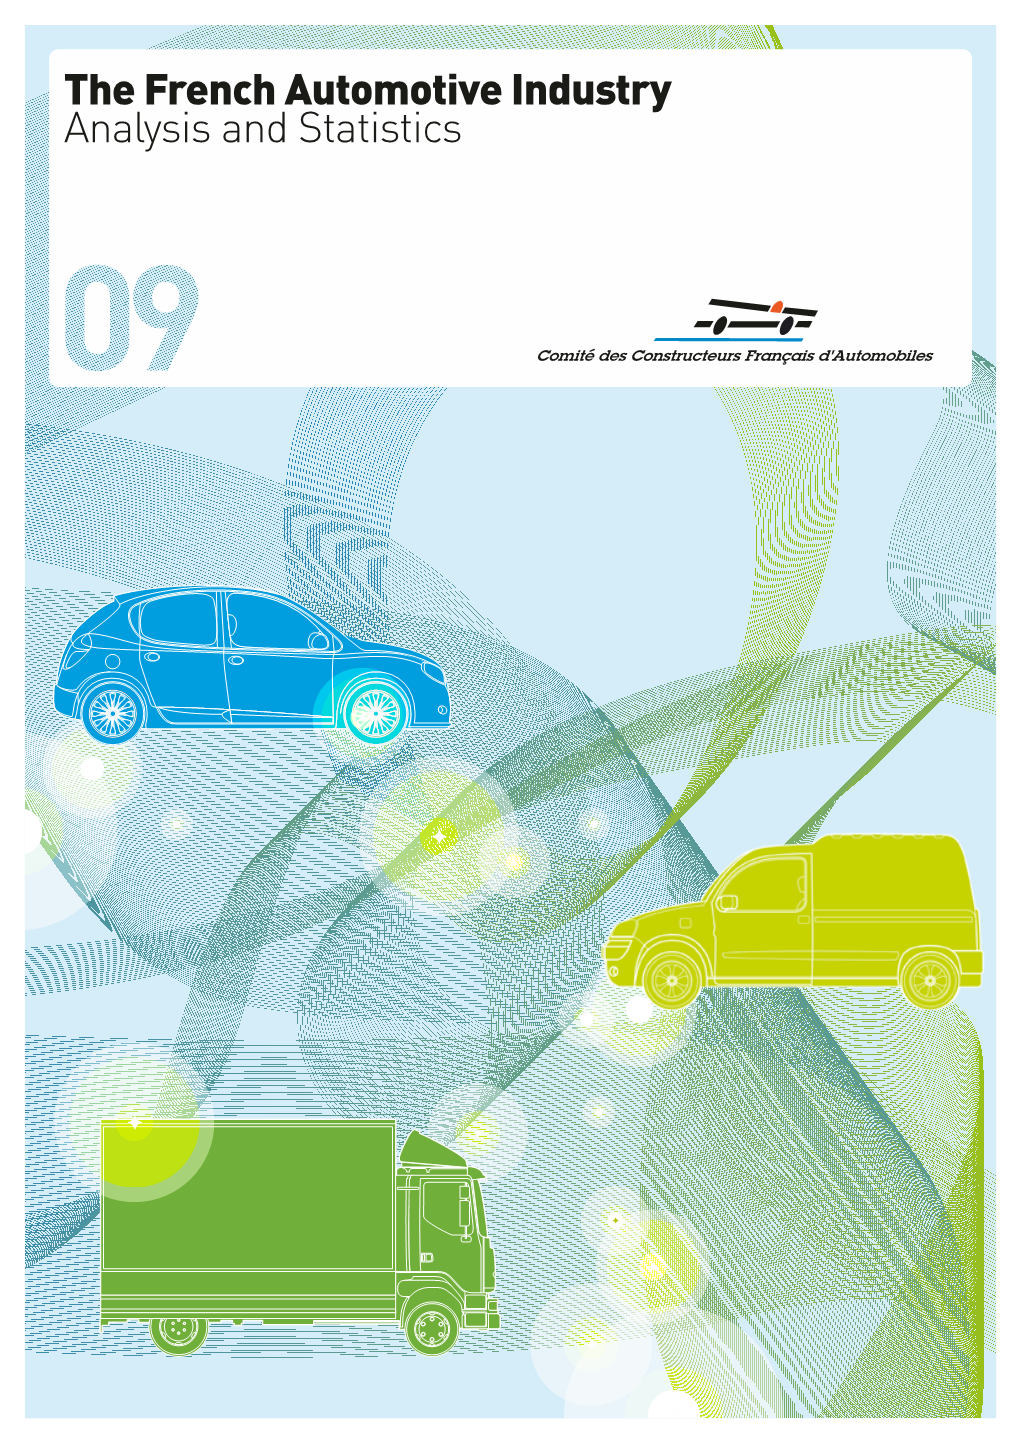 The French Automotive Industry Analysis and Statistics